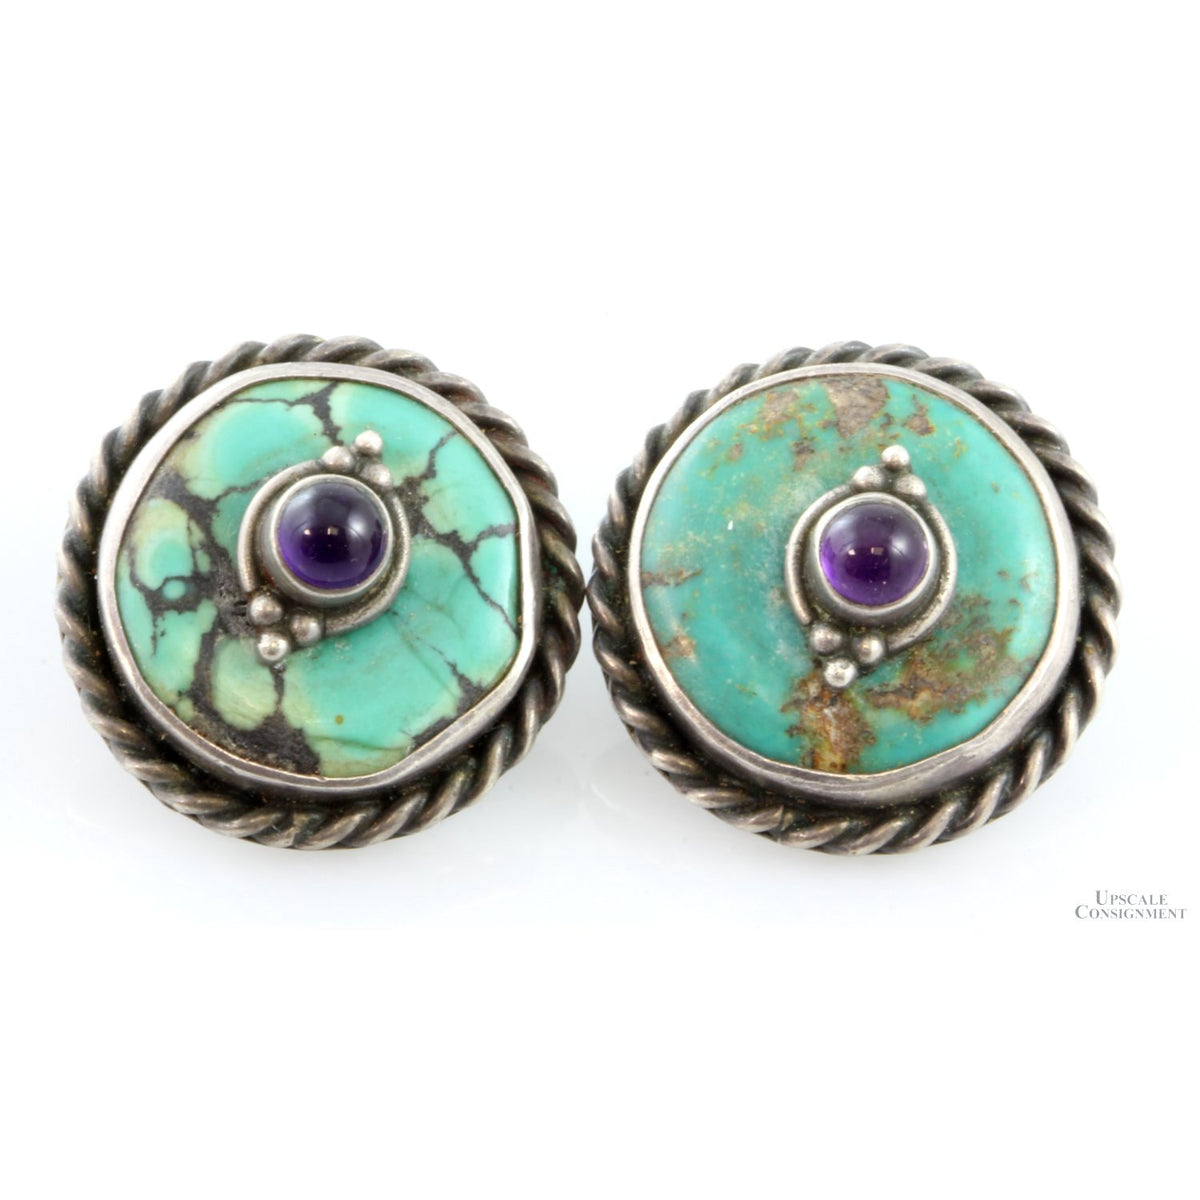 Vintage Retro Syle Turquoise & Amethyst Sterling Silver Earrings